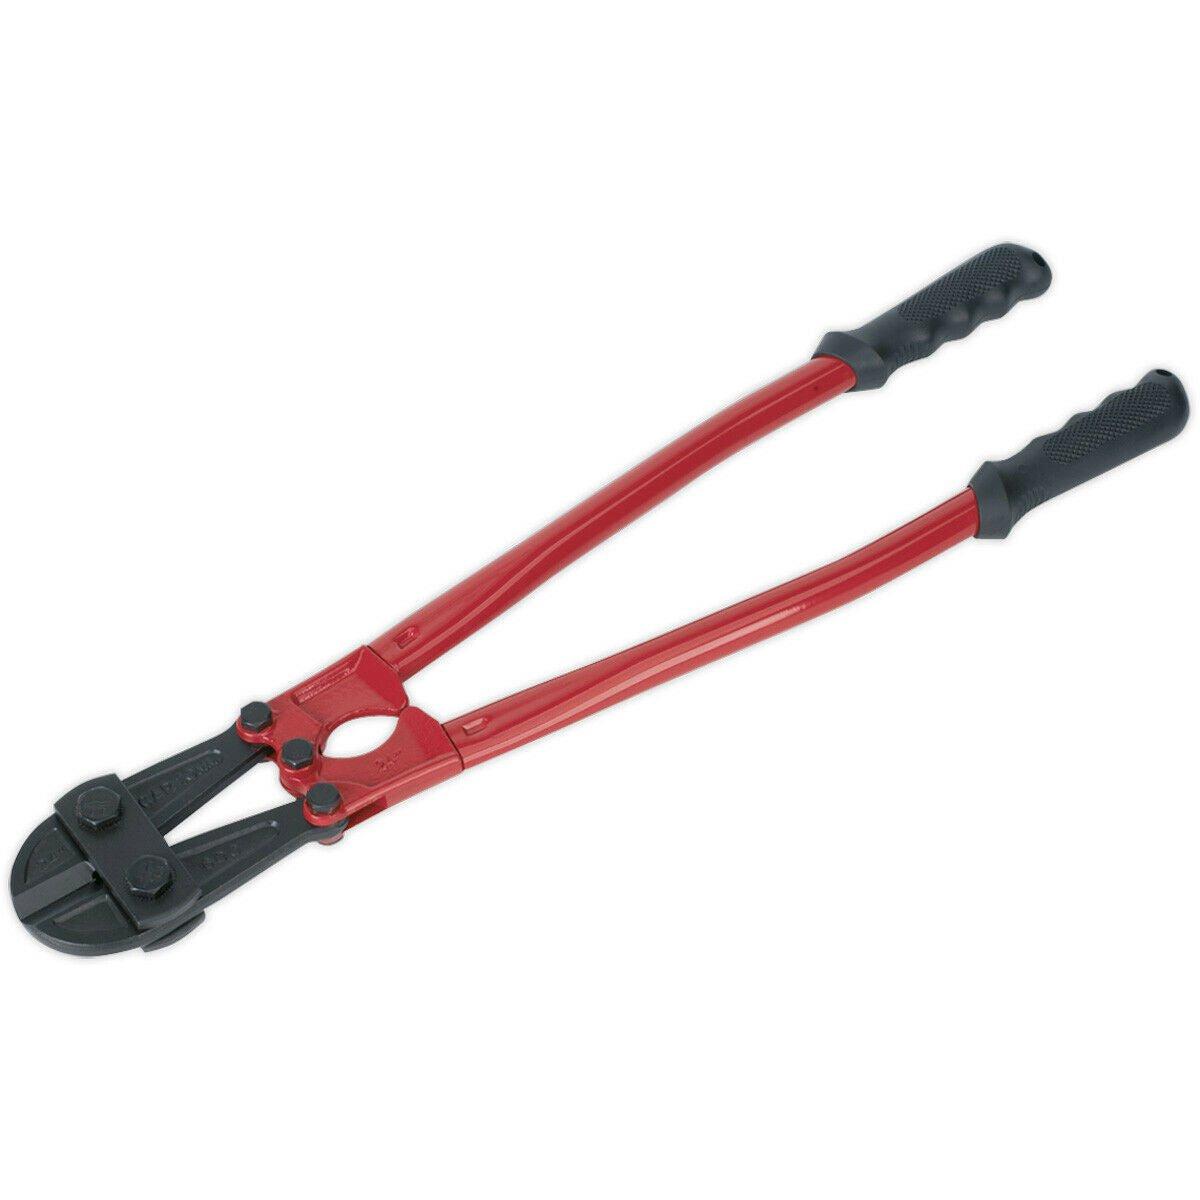 600mm Bolt Cropper - 10mm Jaw Capacity - Chromoly Steel Jaws - Rubber Grips